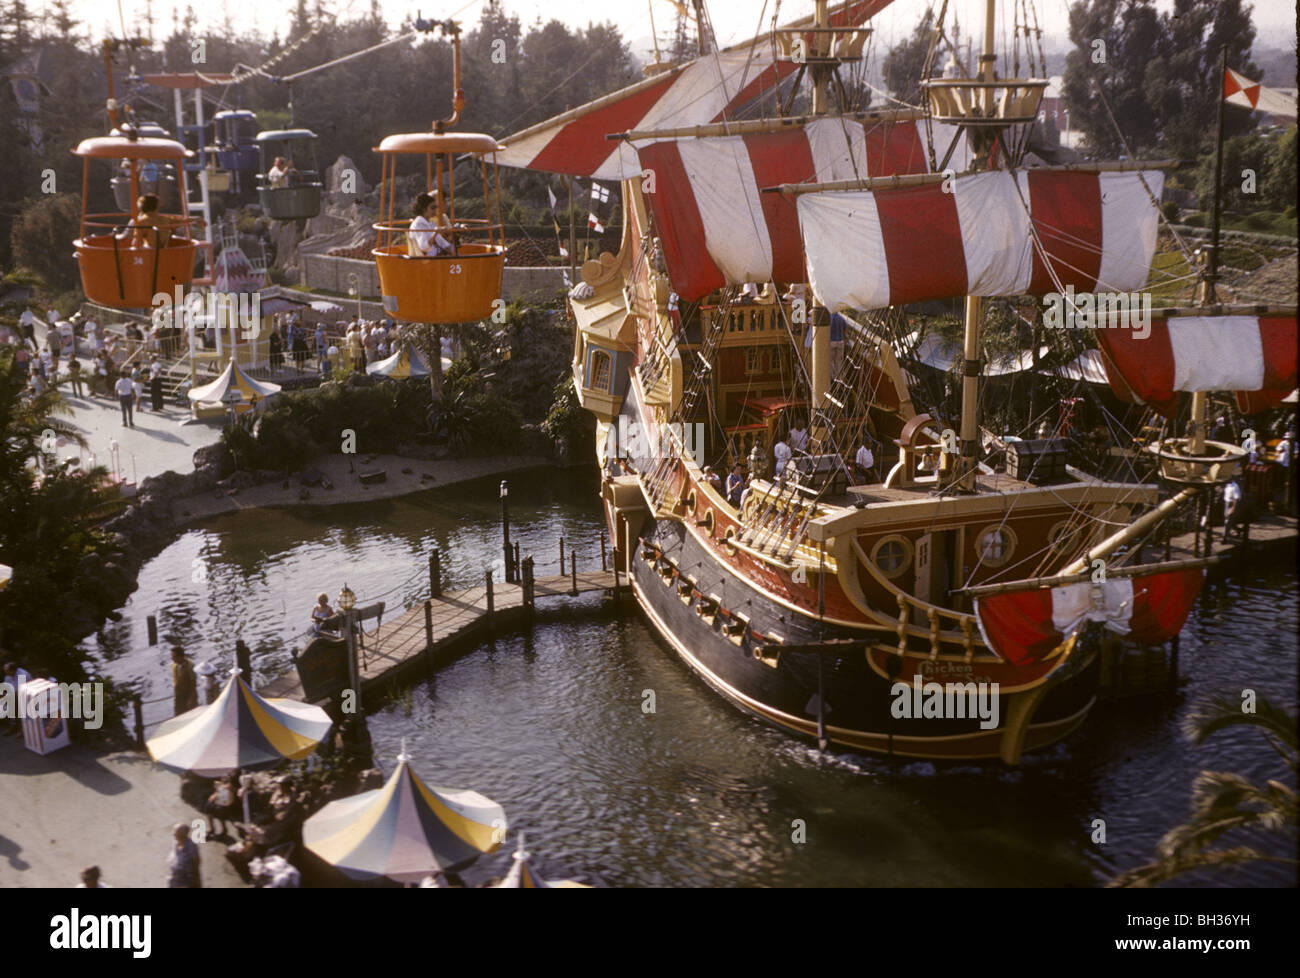 Chicken of the Sea Restaurant seen from skyway with gondolas in background. Disneyland vacation Kodachromes from 1962.  Stock Photo